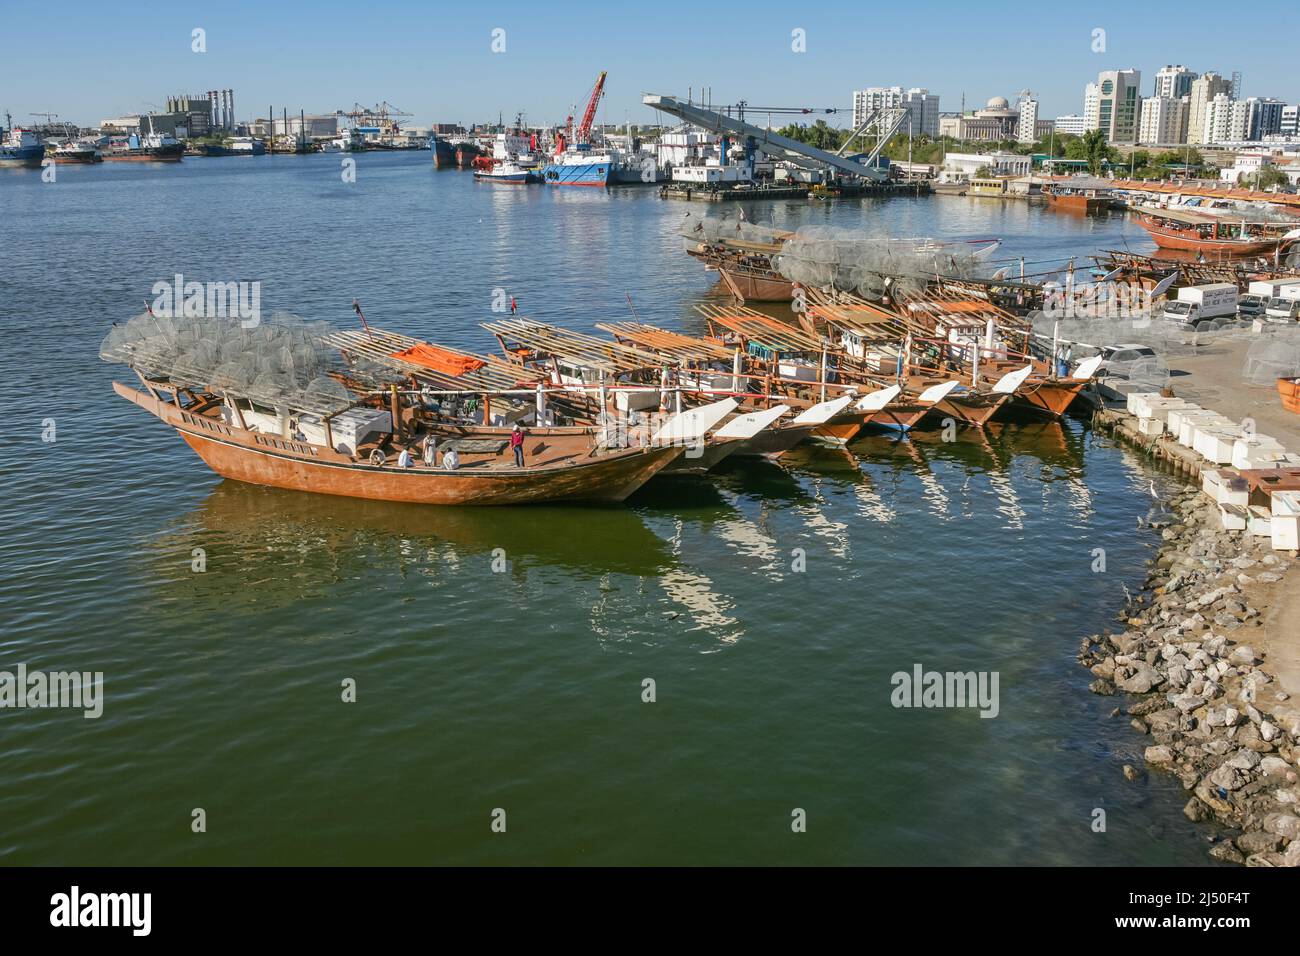 Traditional fishing dhows laden with gargours, or fish traps, lined up near Sharjah Bridge in Sharjah in the United Arab Emirates. Stock Photo